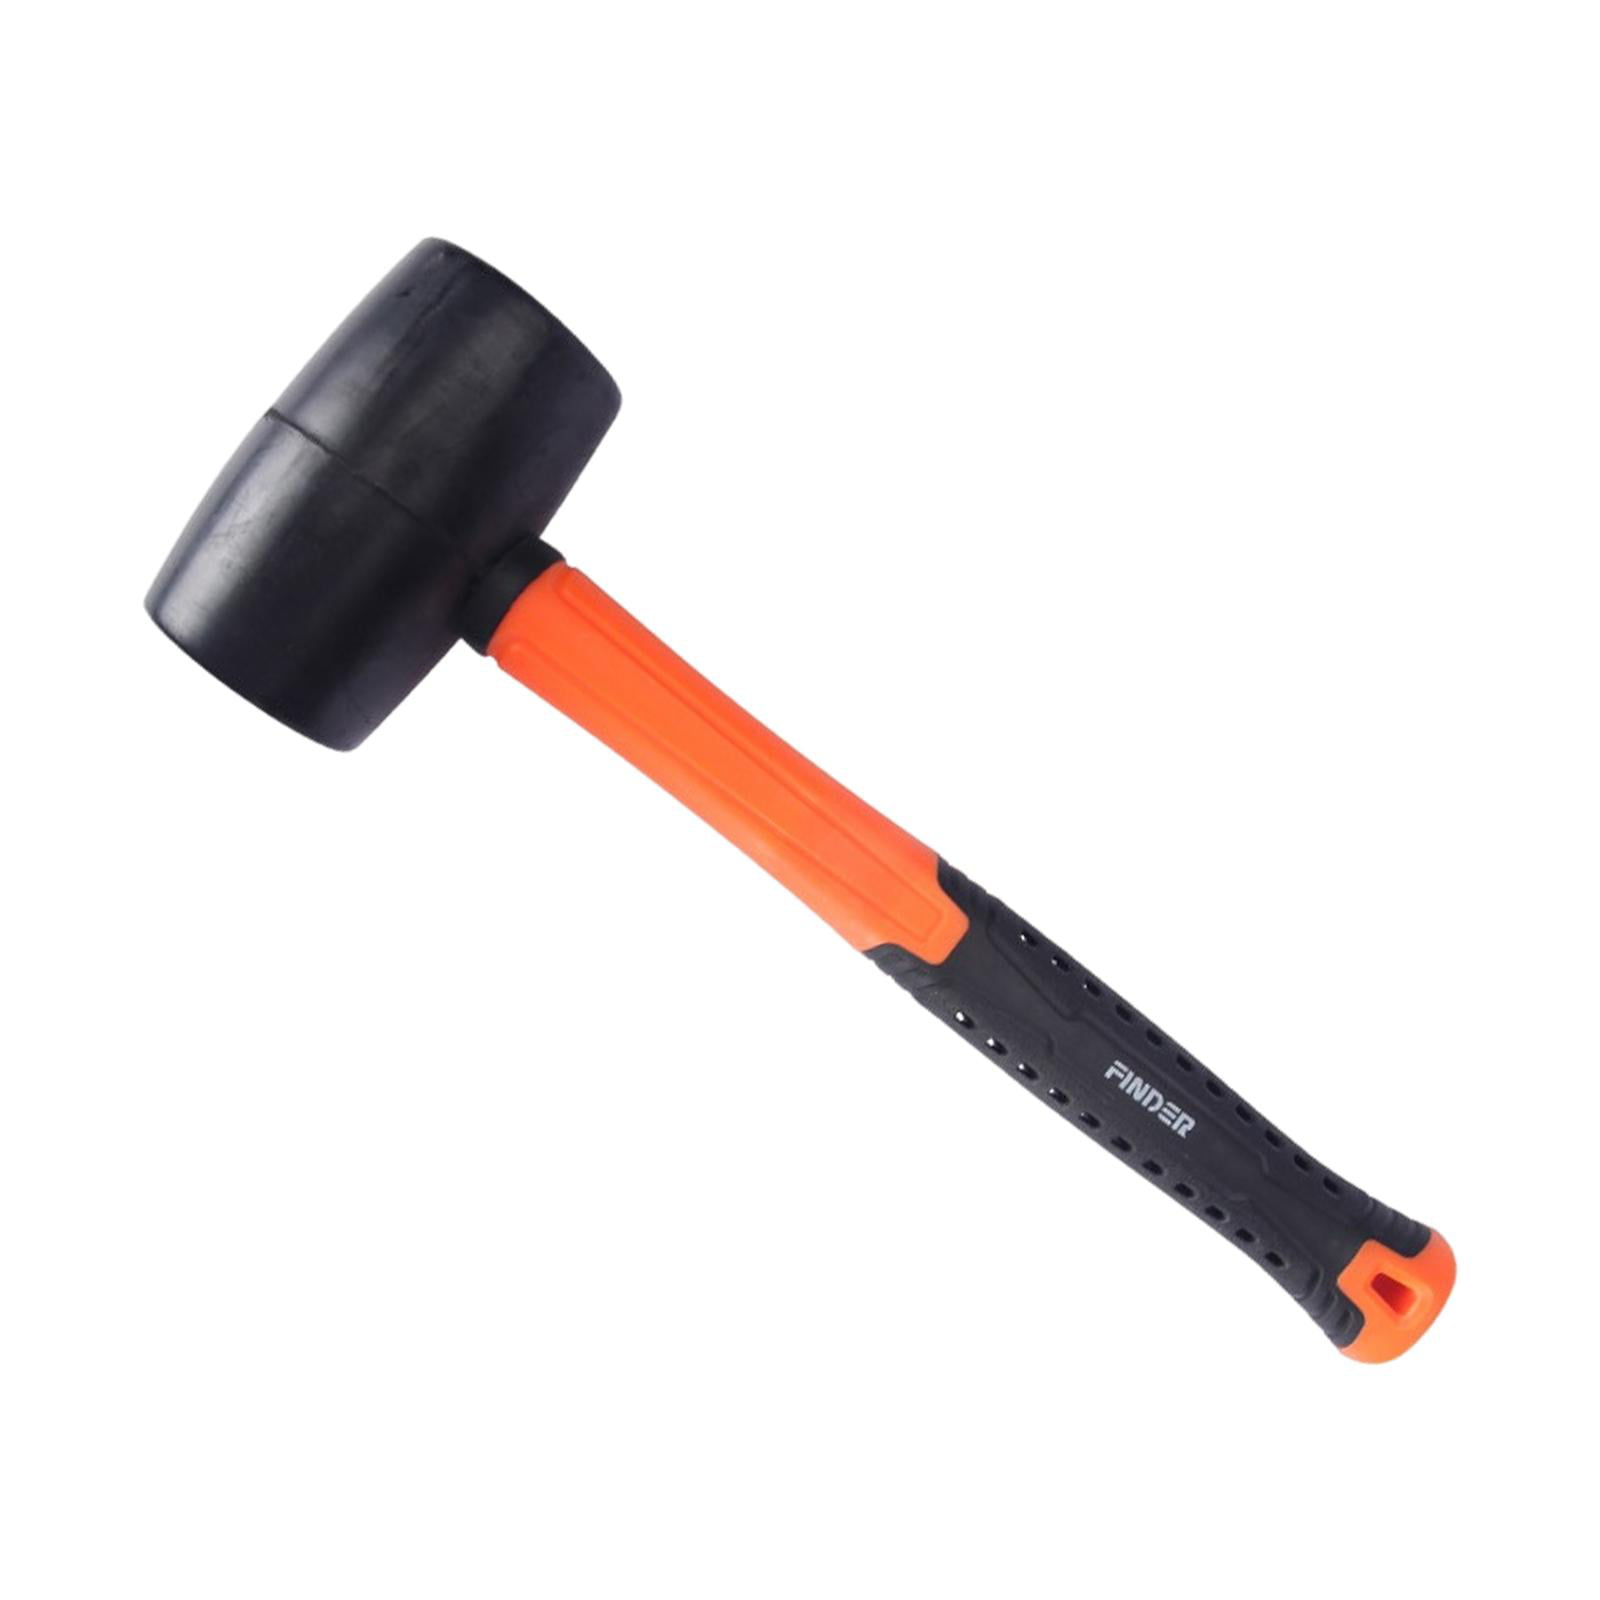 32oz Rubber Mallet Fibreglass Handle with Rubber Grip for Camping DIY Woodwork 